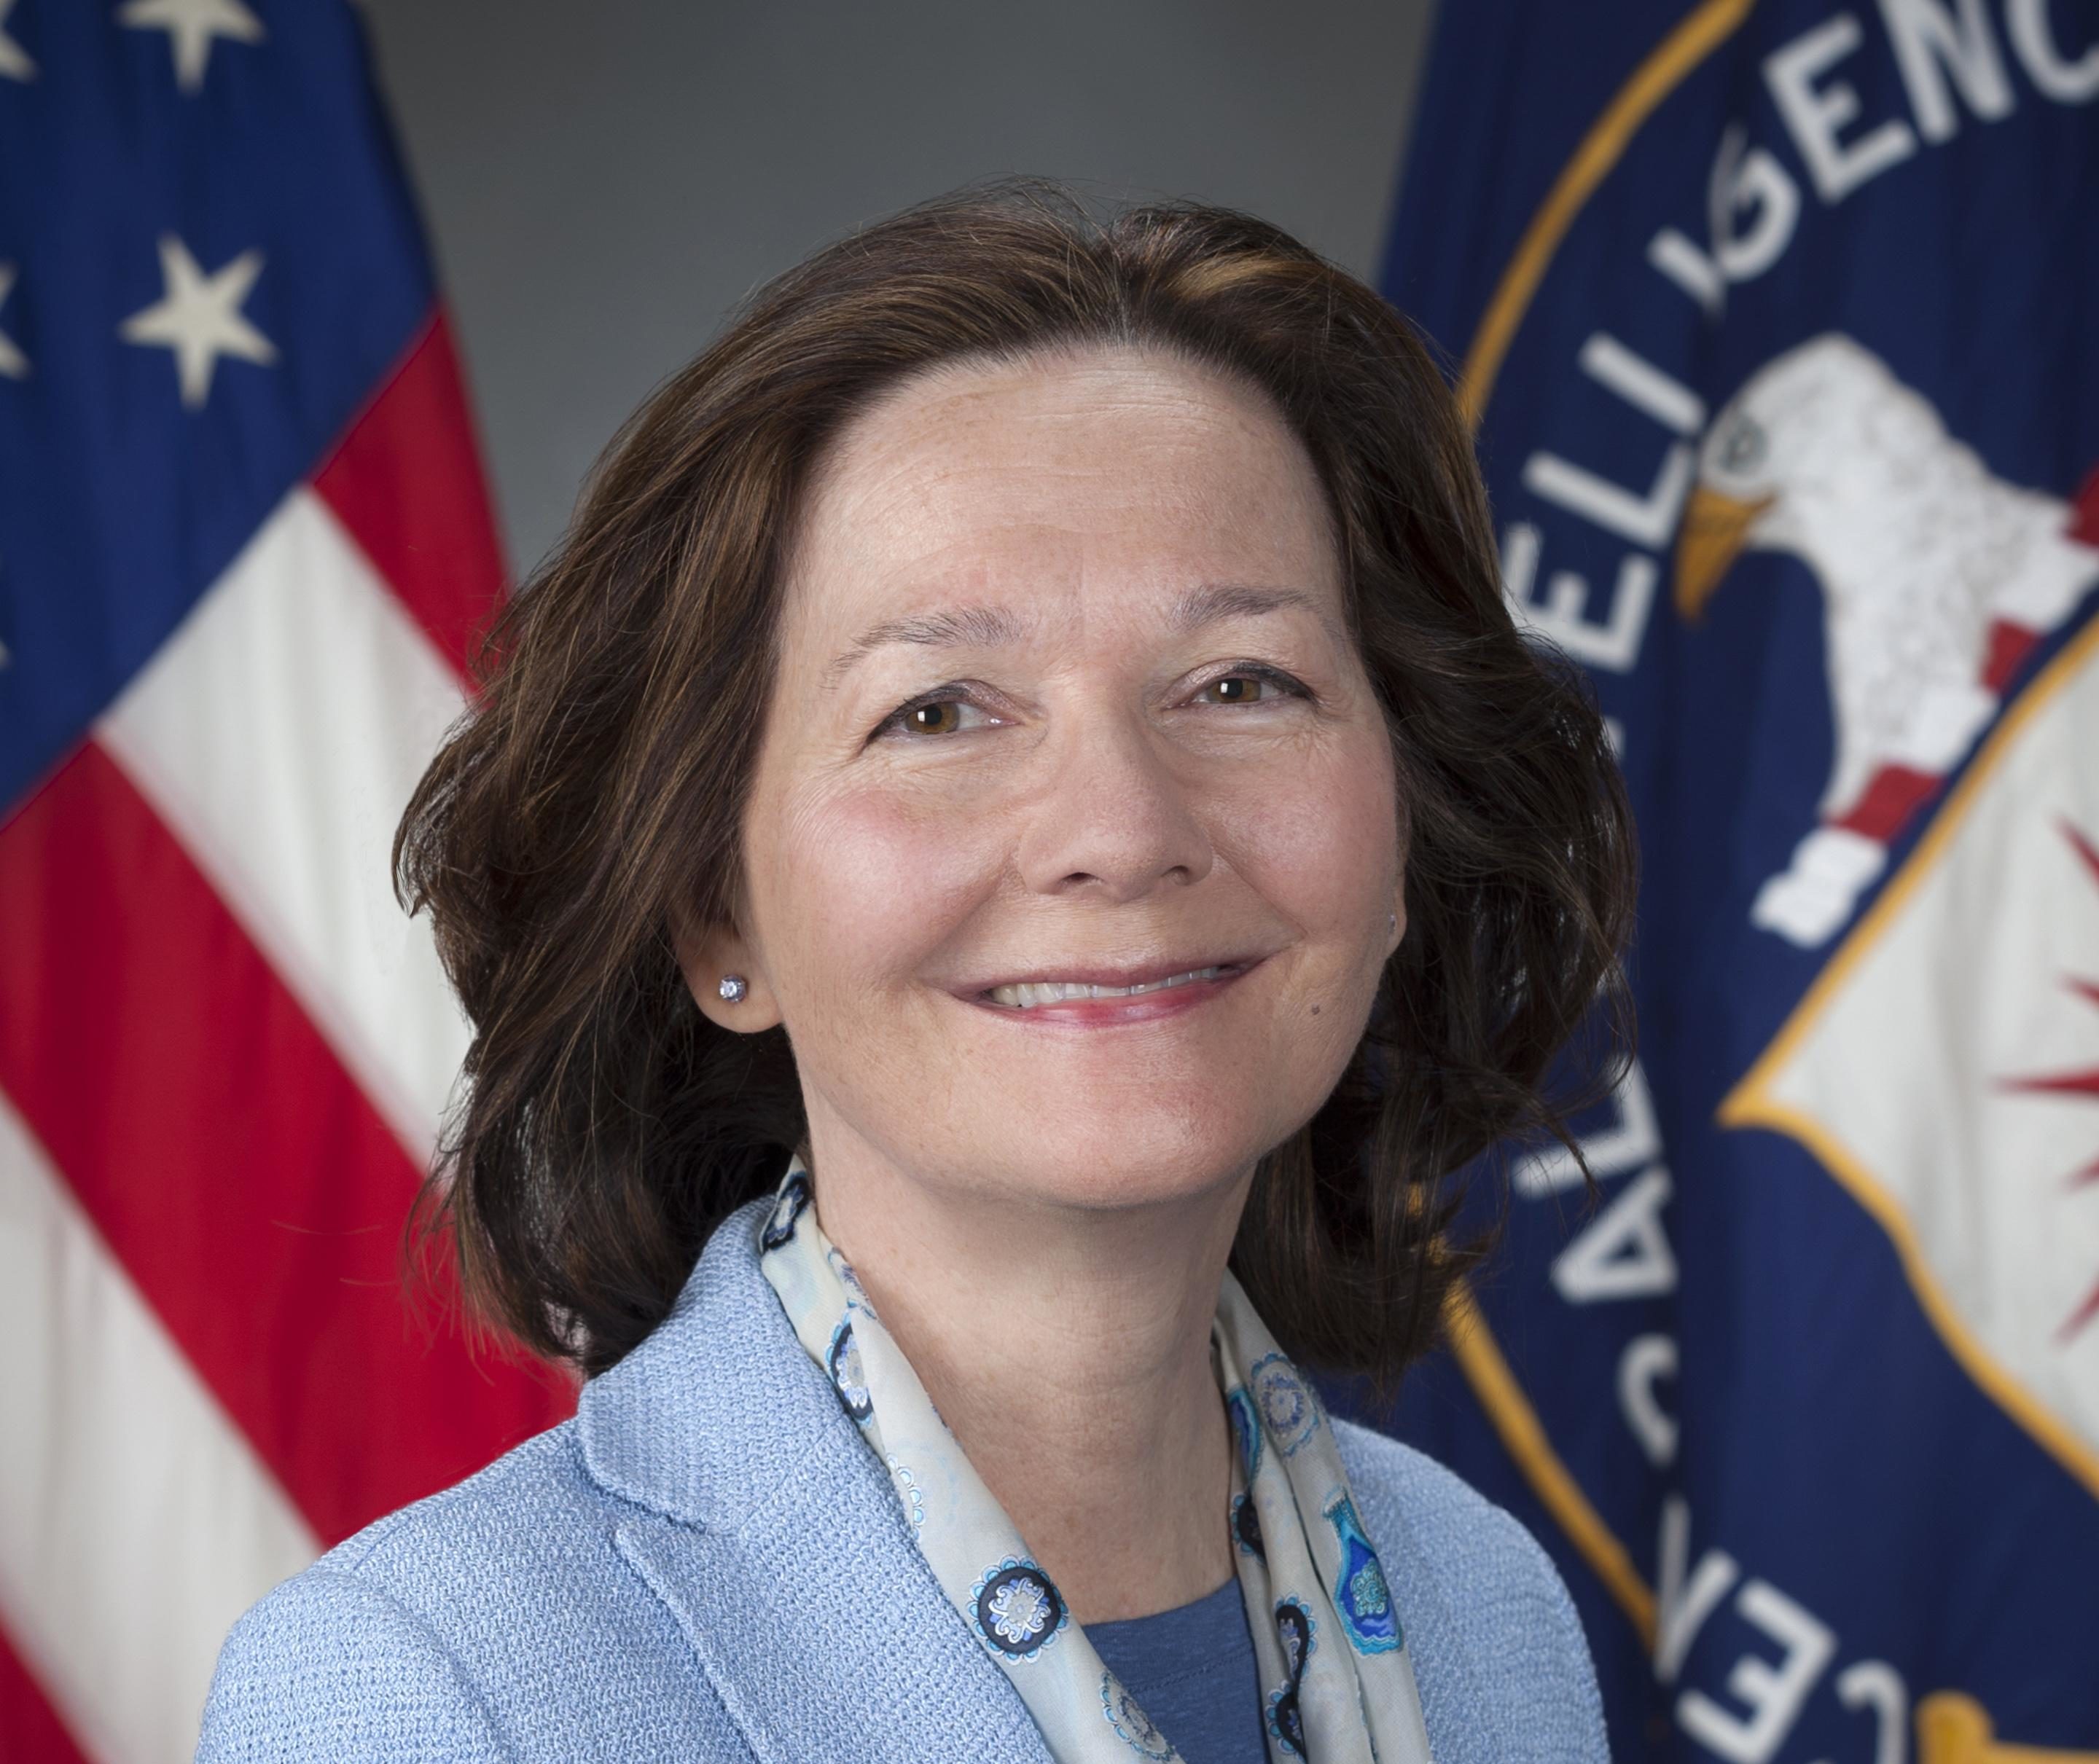 Can Christians Support Gina Haspel as CIA Director? Torture Bonnie Kristian